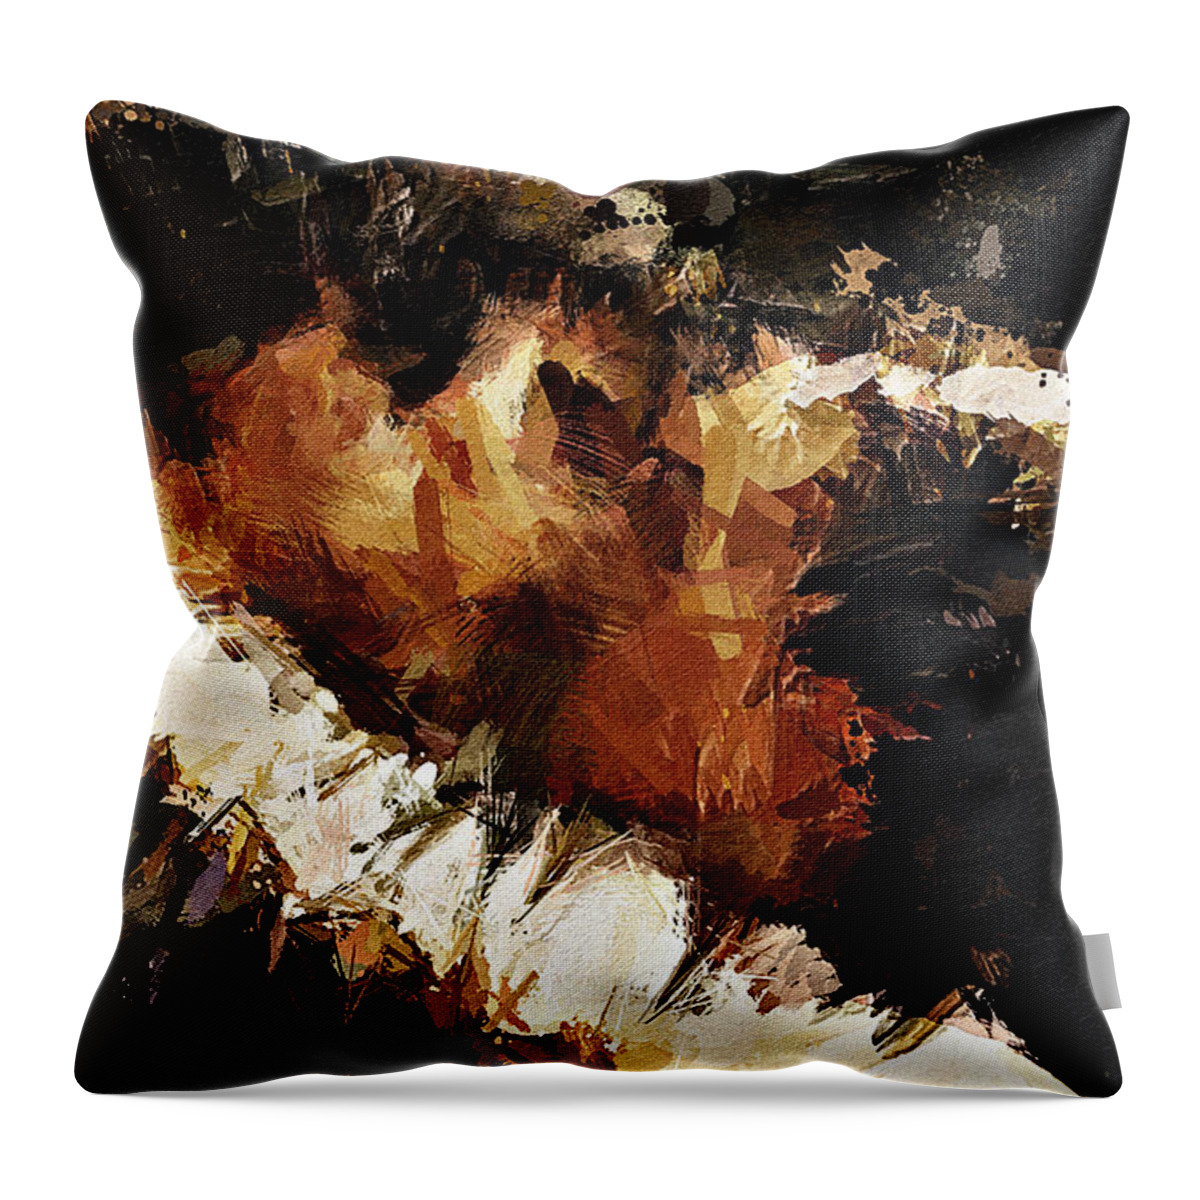 Couple Throw Pillow featuring the painting Passion by Inspirowl Design